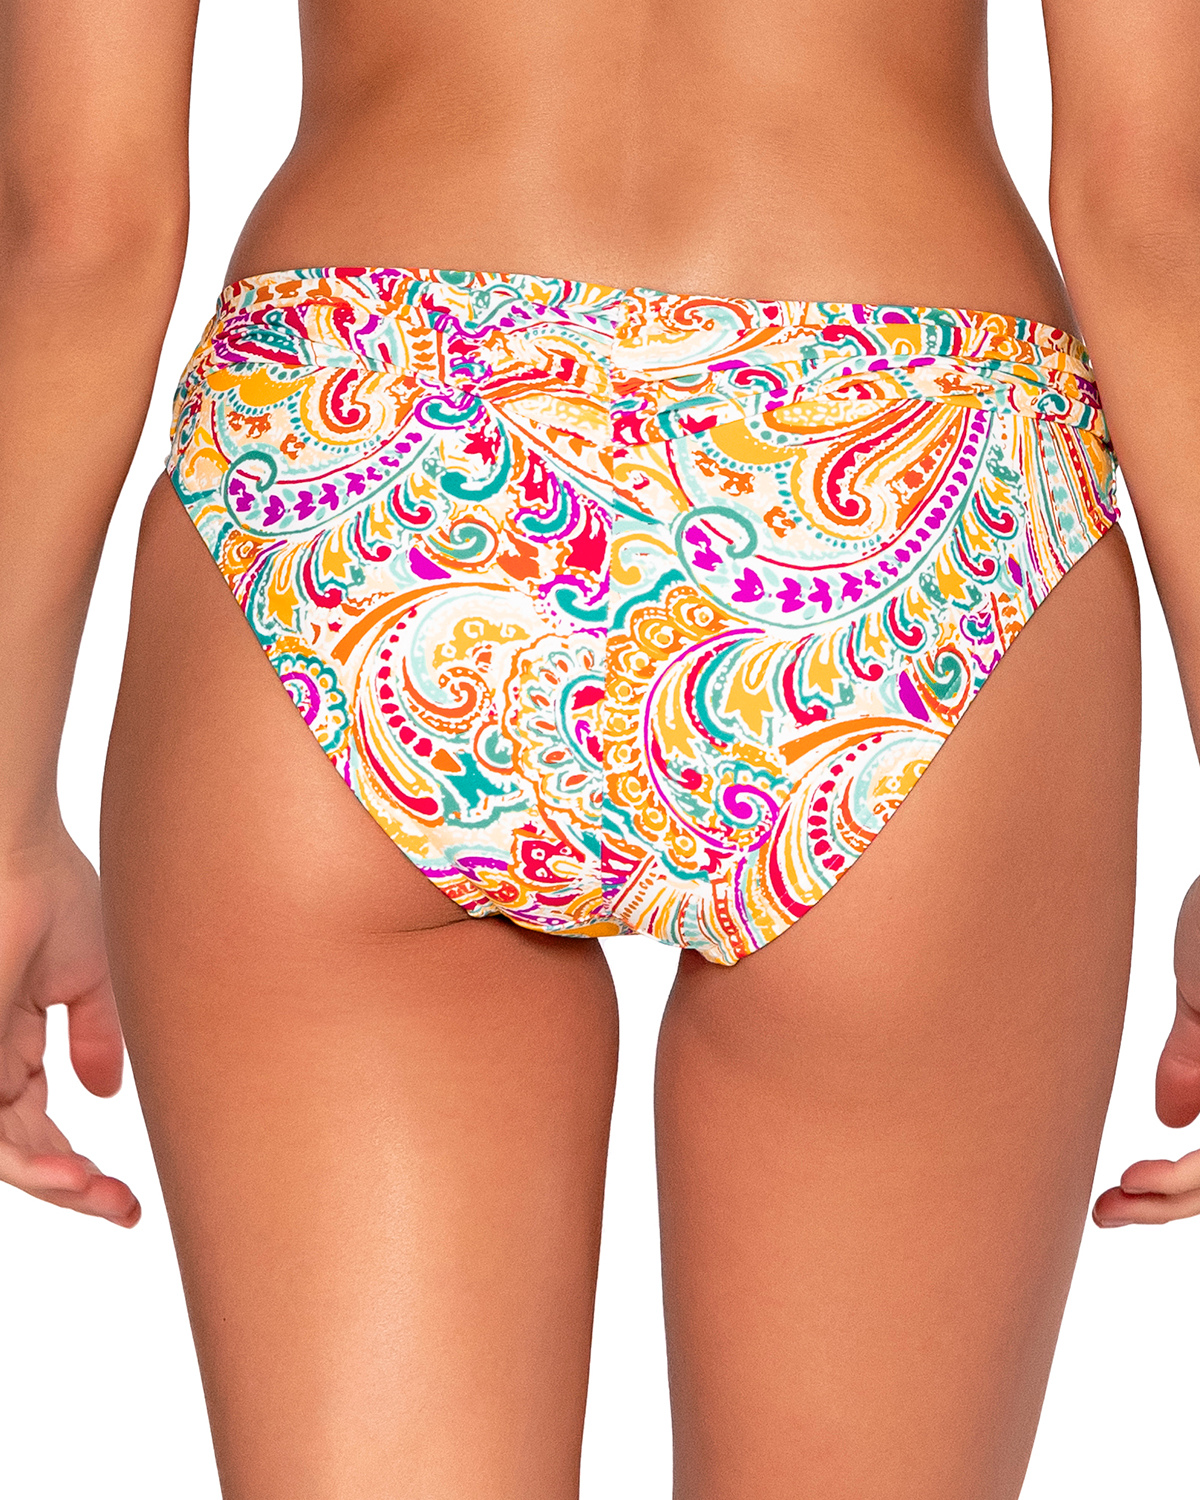 Model wearing a hipster bikini bottom in a white, yellow, red, purple and turquoise paisley print.